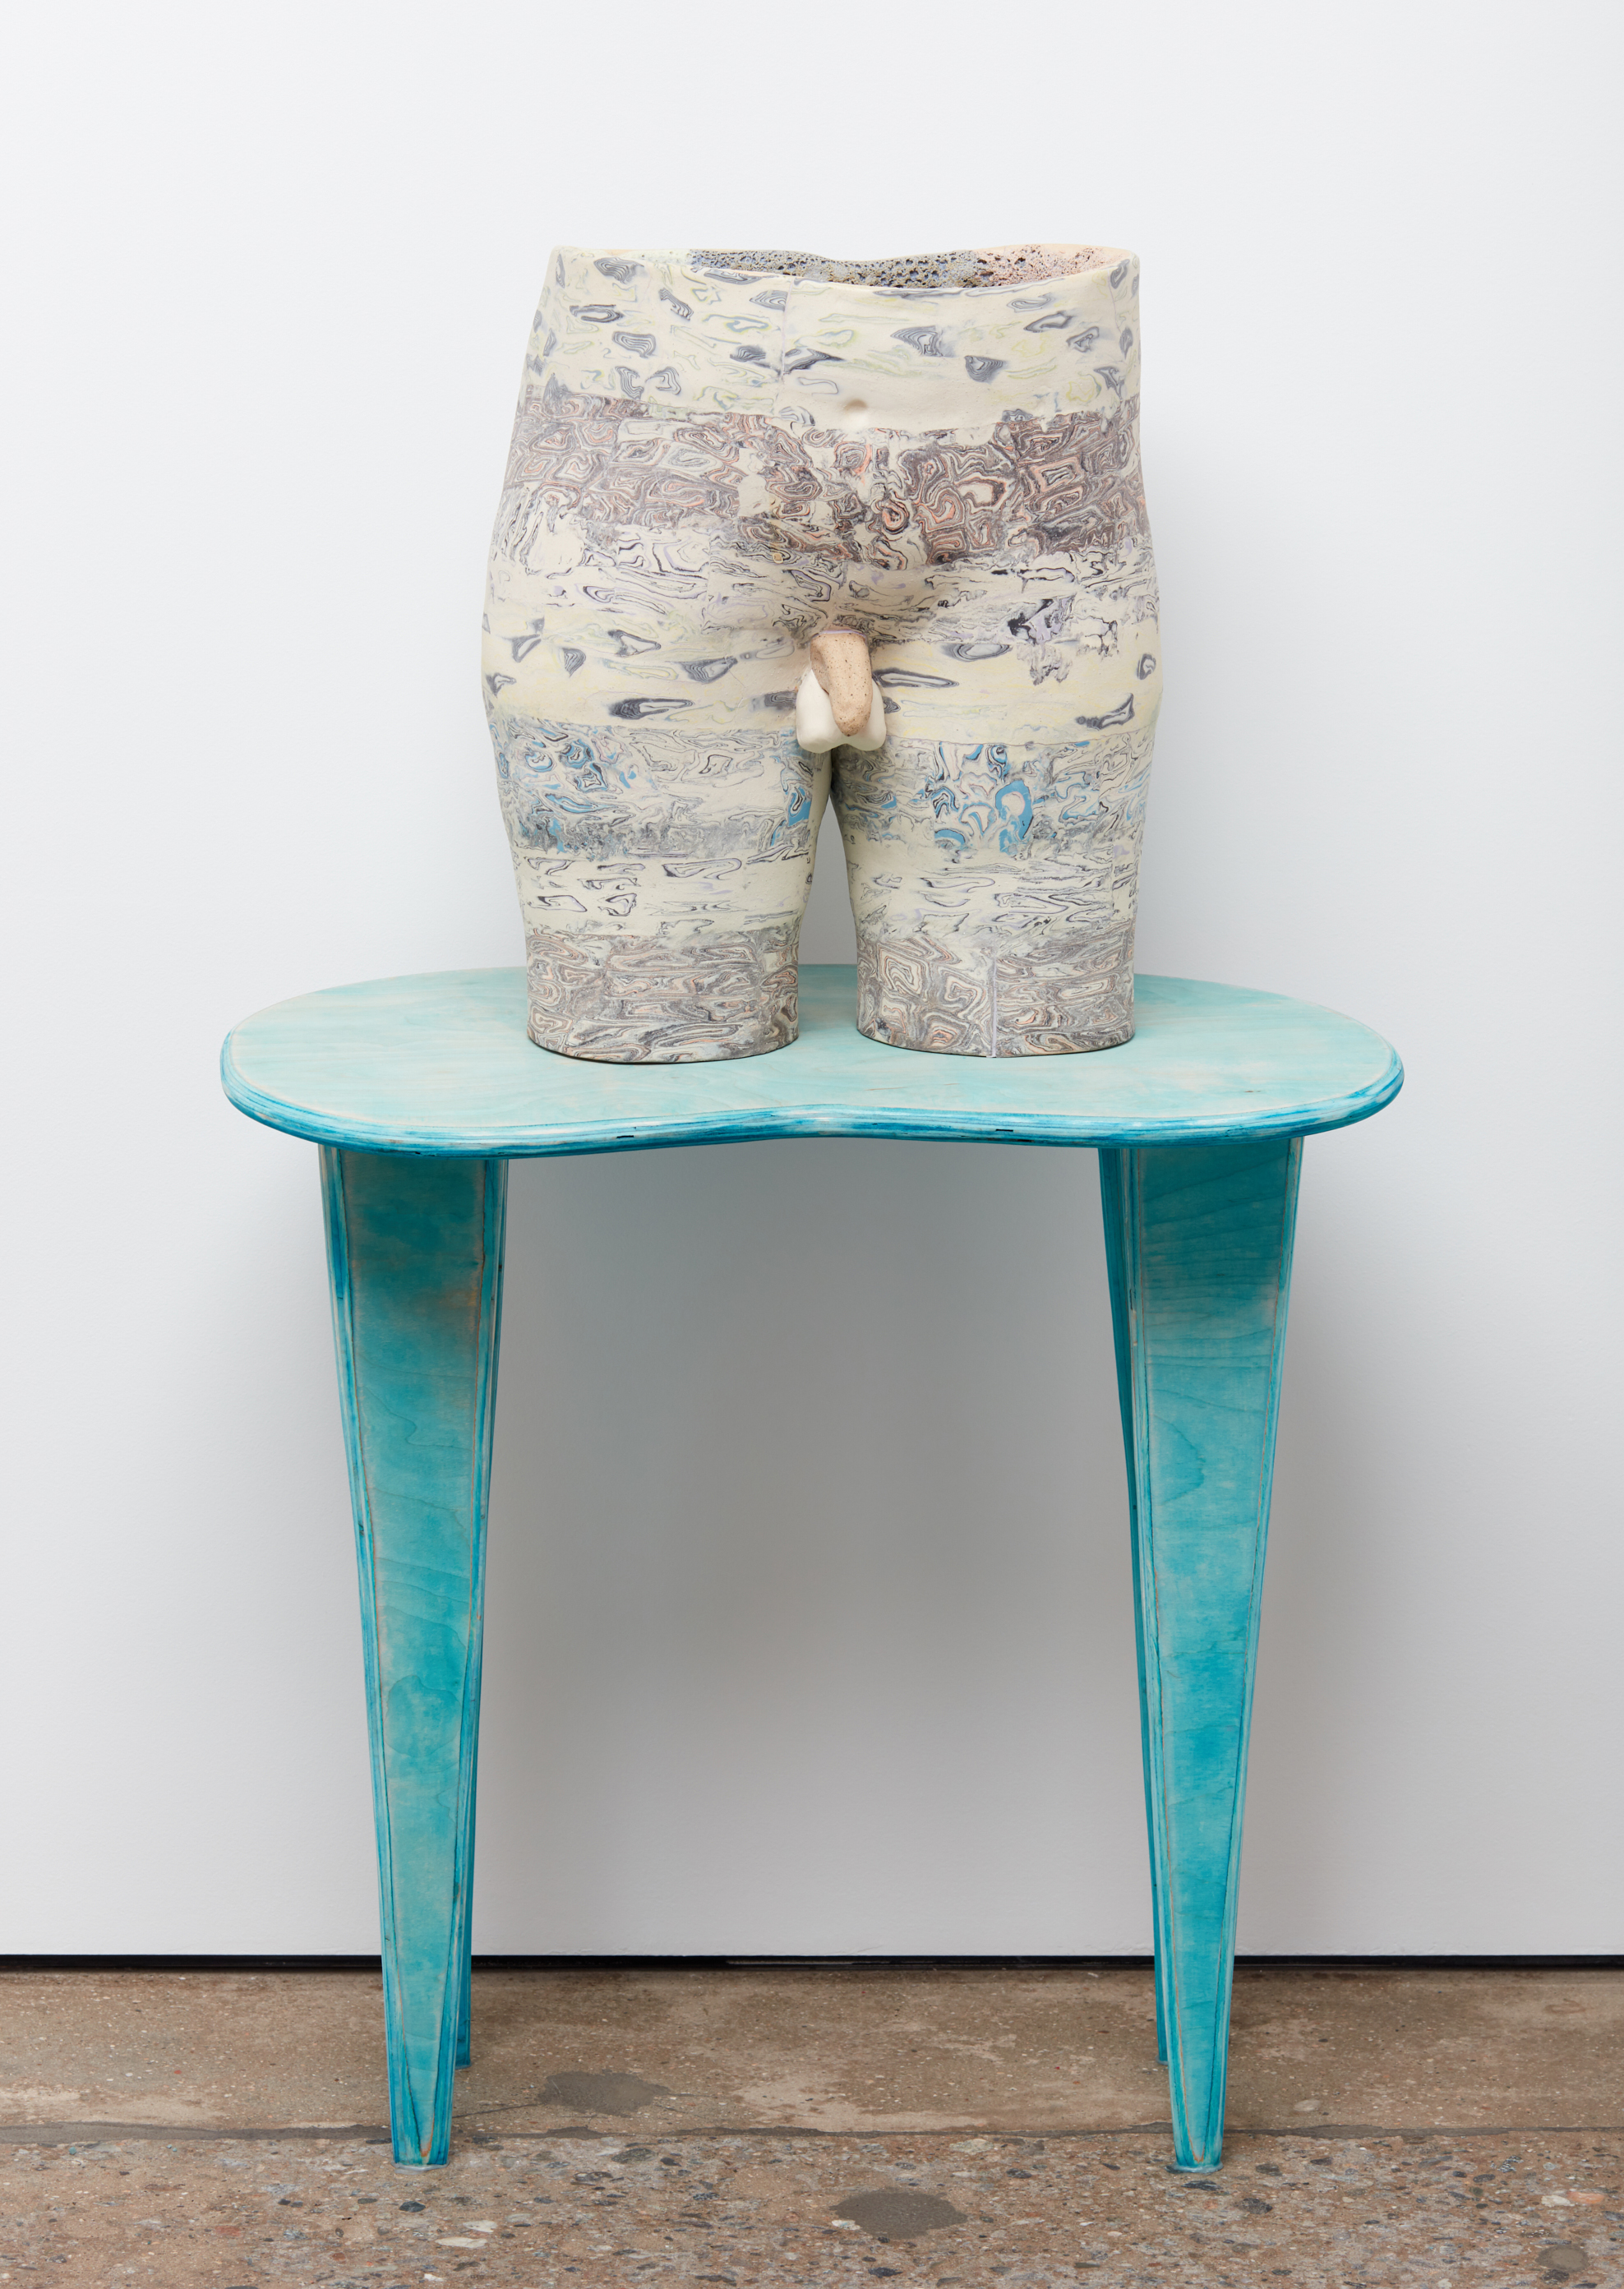 Alice LANG, 'Better Half #5' 2018, marbled porcelain, lava glaze, ply and wood dye. Courtesy of the artist